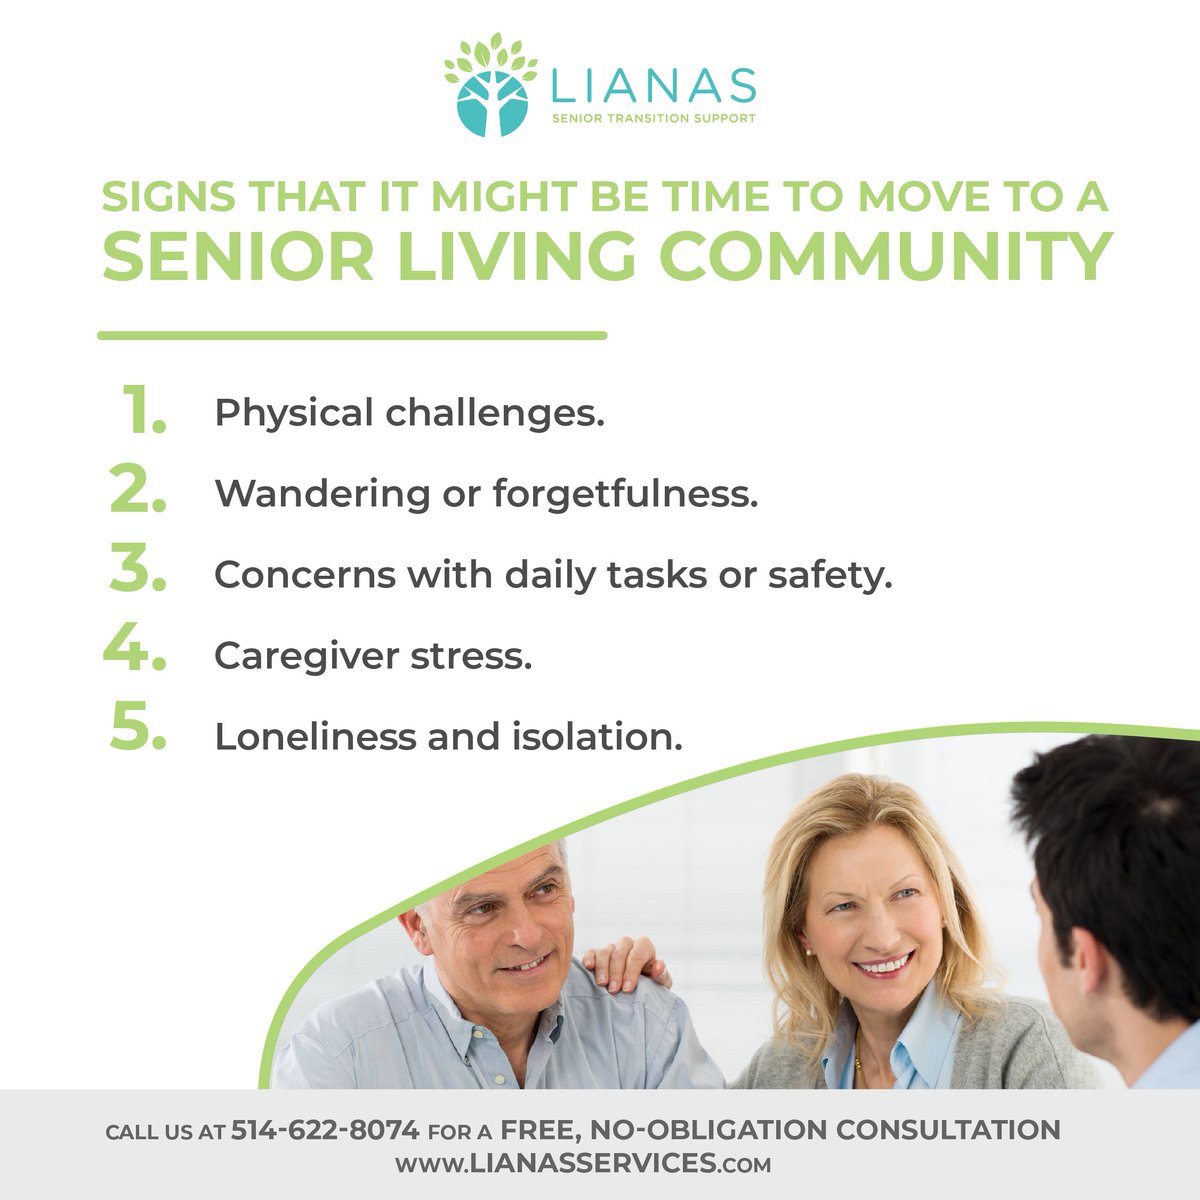 Signs that it might be time to move to a senior living community #helpingmomsanddads #seniorsupport #seniorcare #eldercare #seniorliving